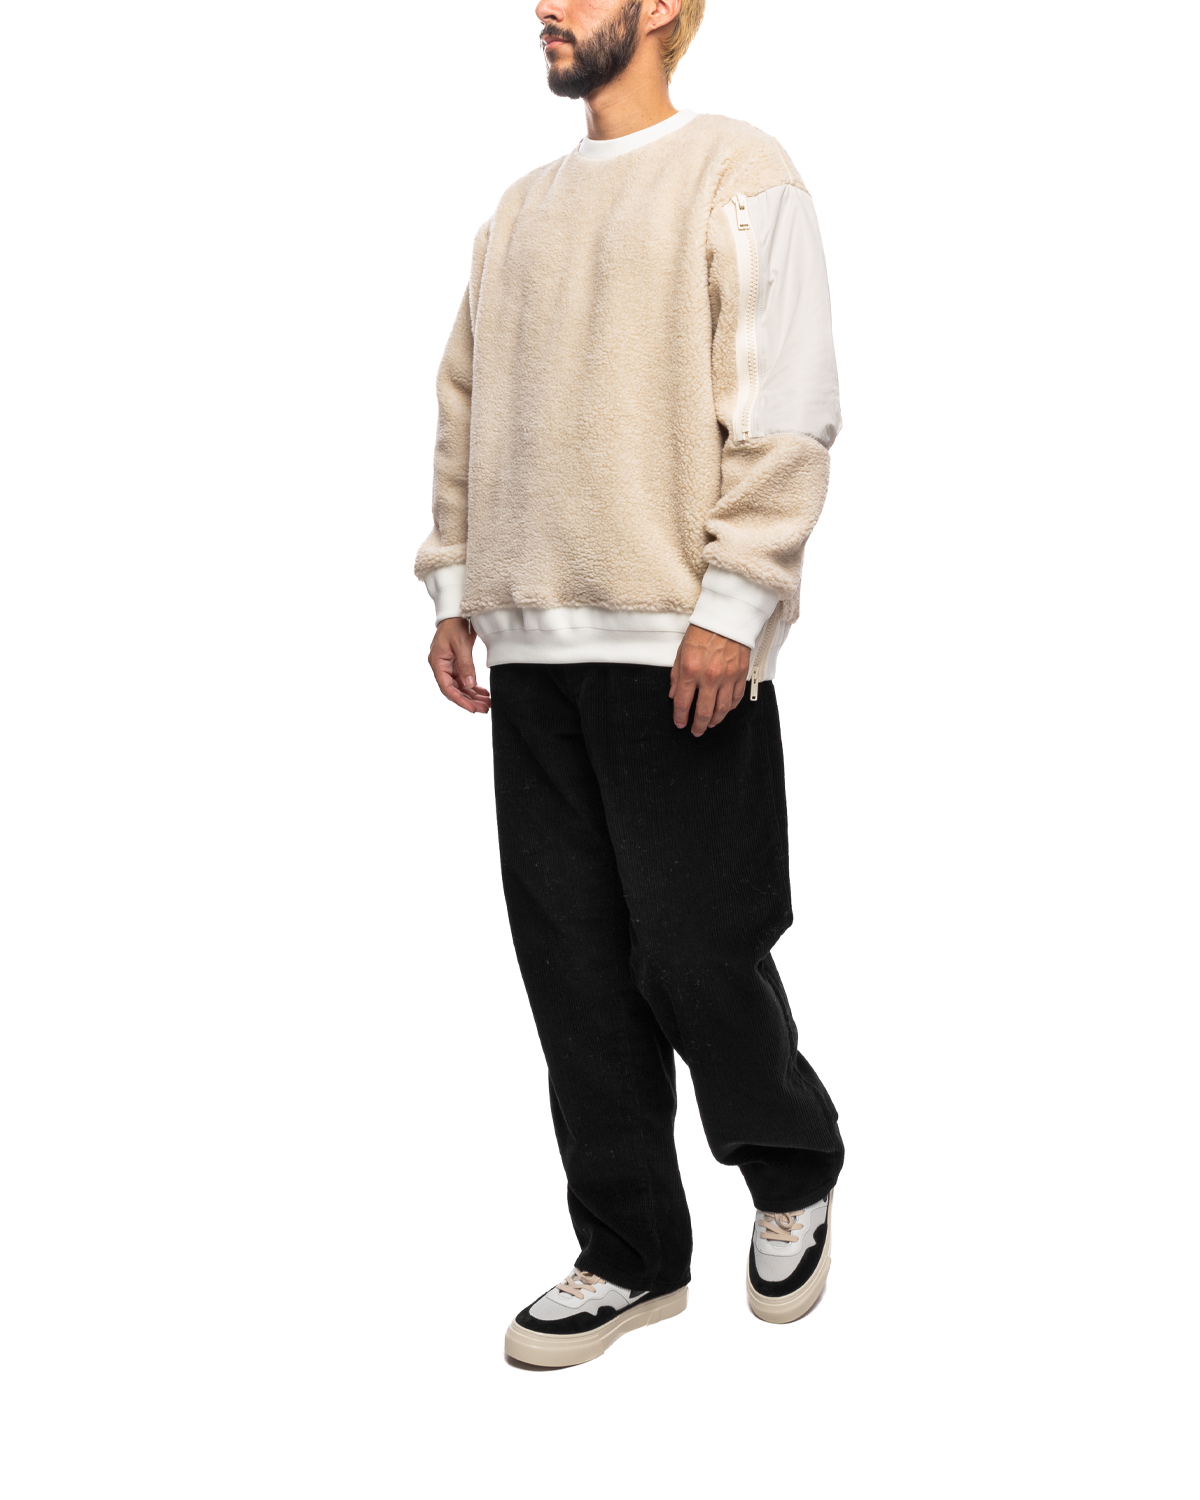 UP2C4810 Sherpa Pullover Off White